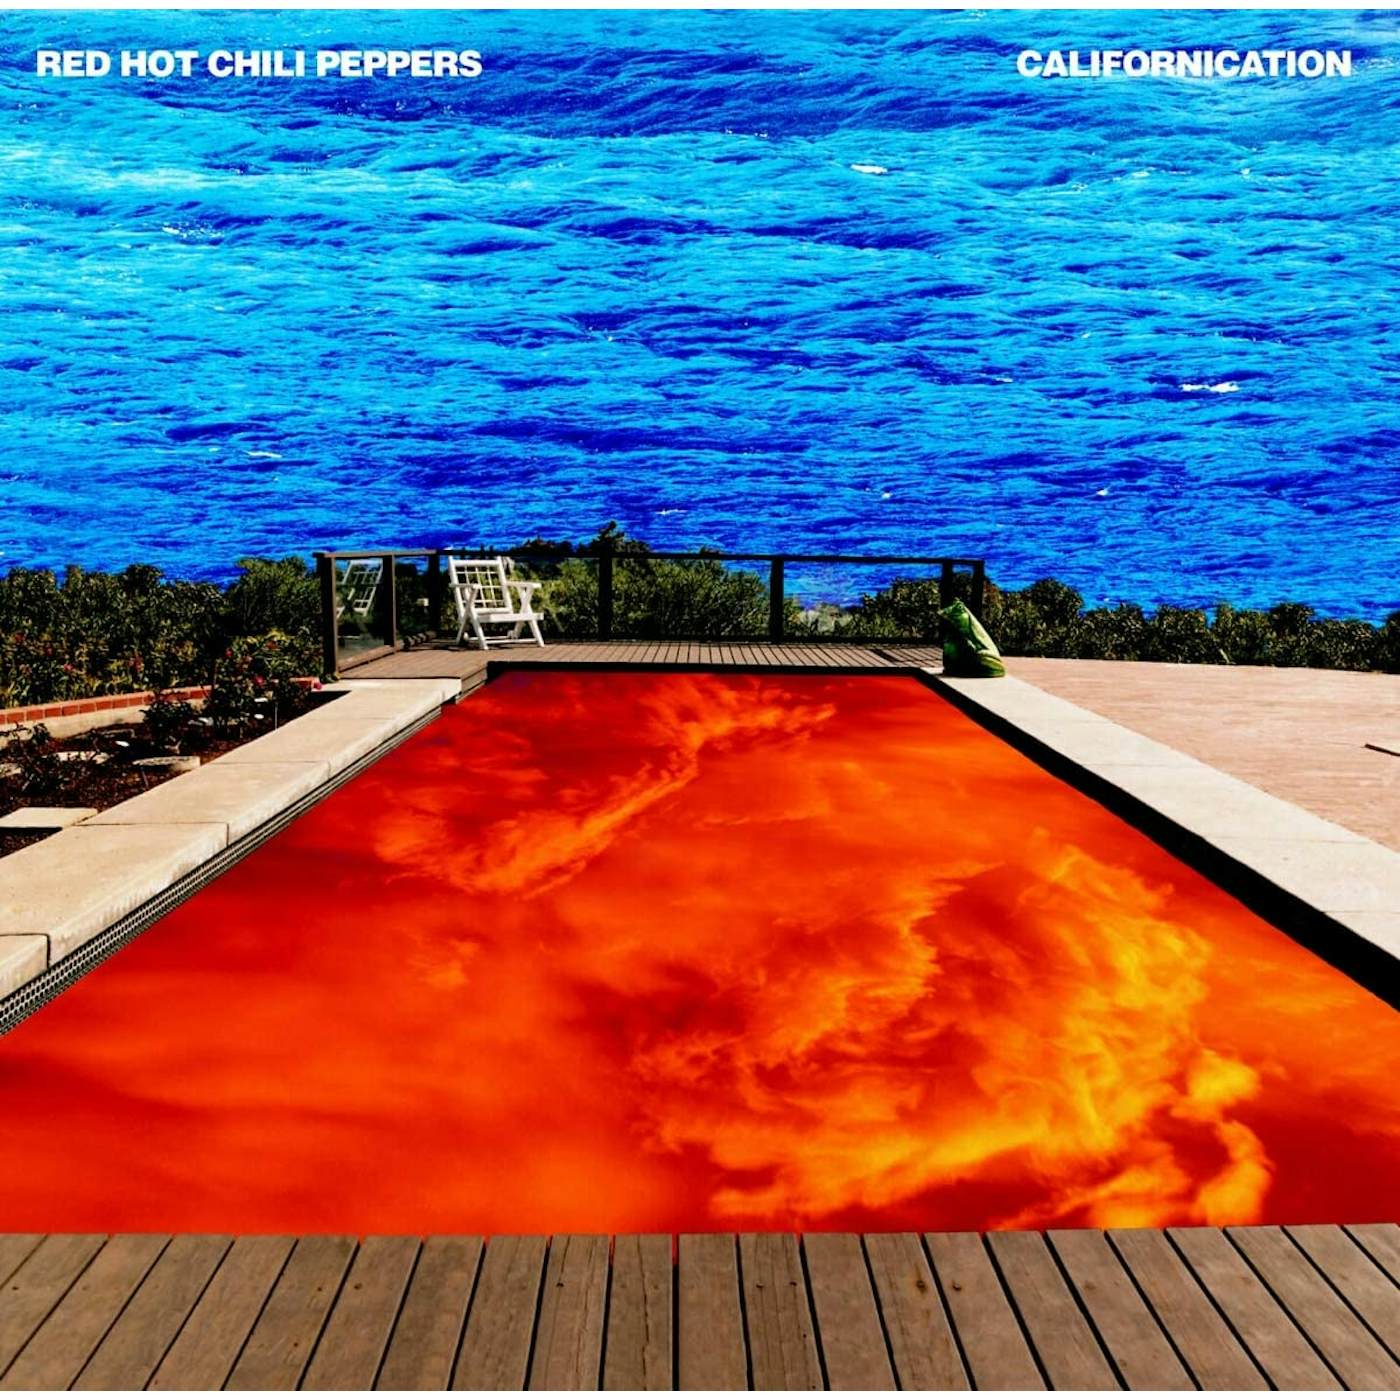 Red Hot Chili Peppers   LP Vinyl Record - Californication